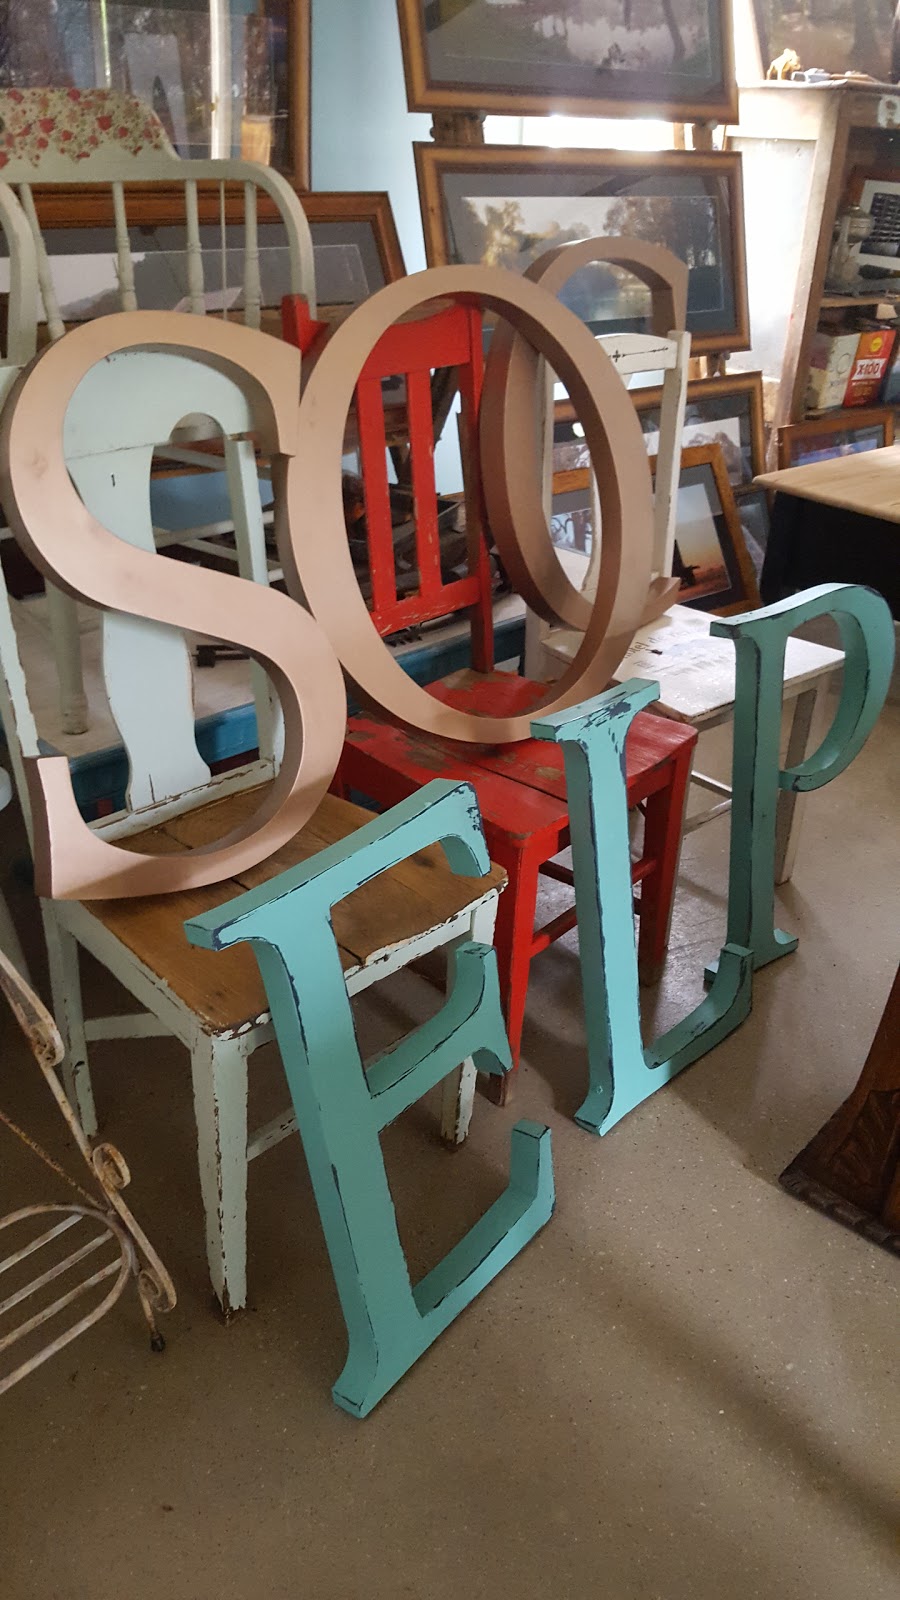 FINDERS KEEPERS | furniture store | 96 Bish Rd, Swan Hill VIC 3585, Australia | 0429322782 OR +61 429 322 782